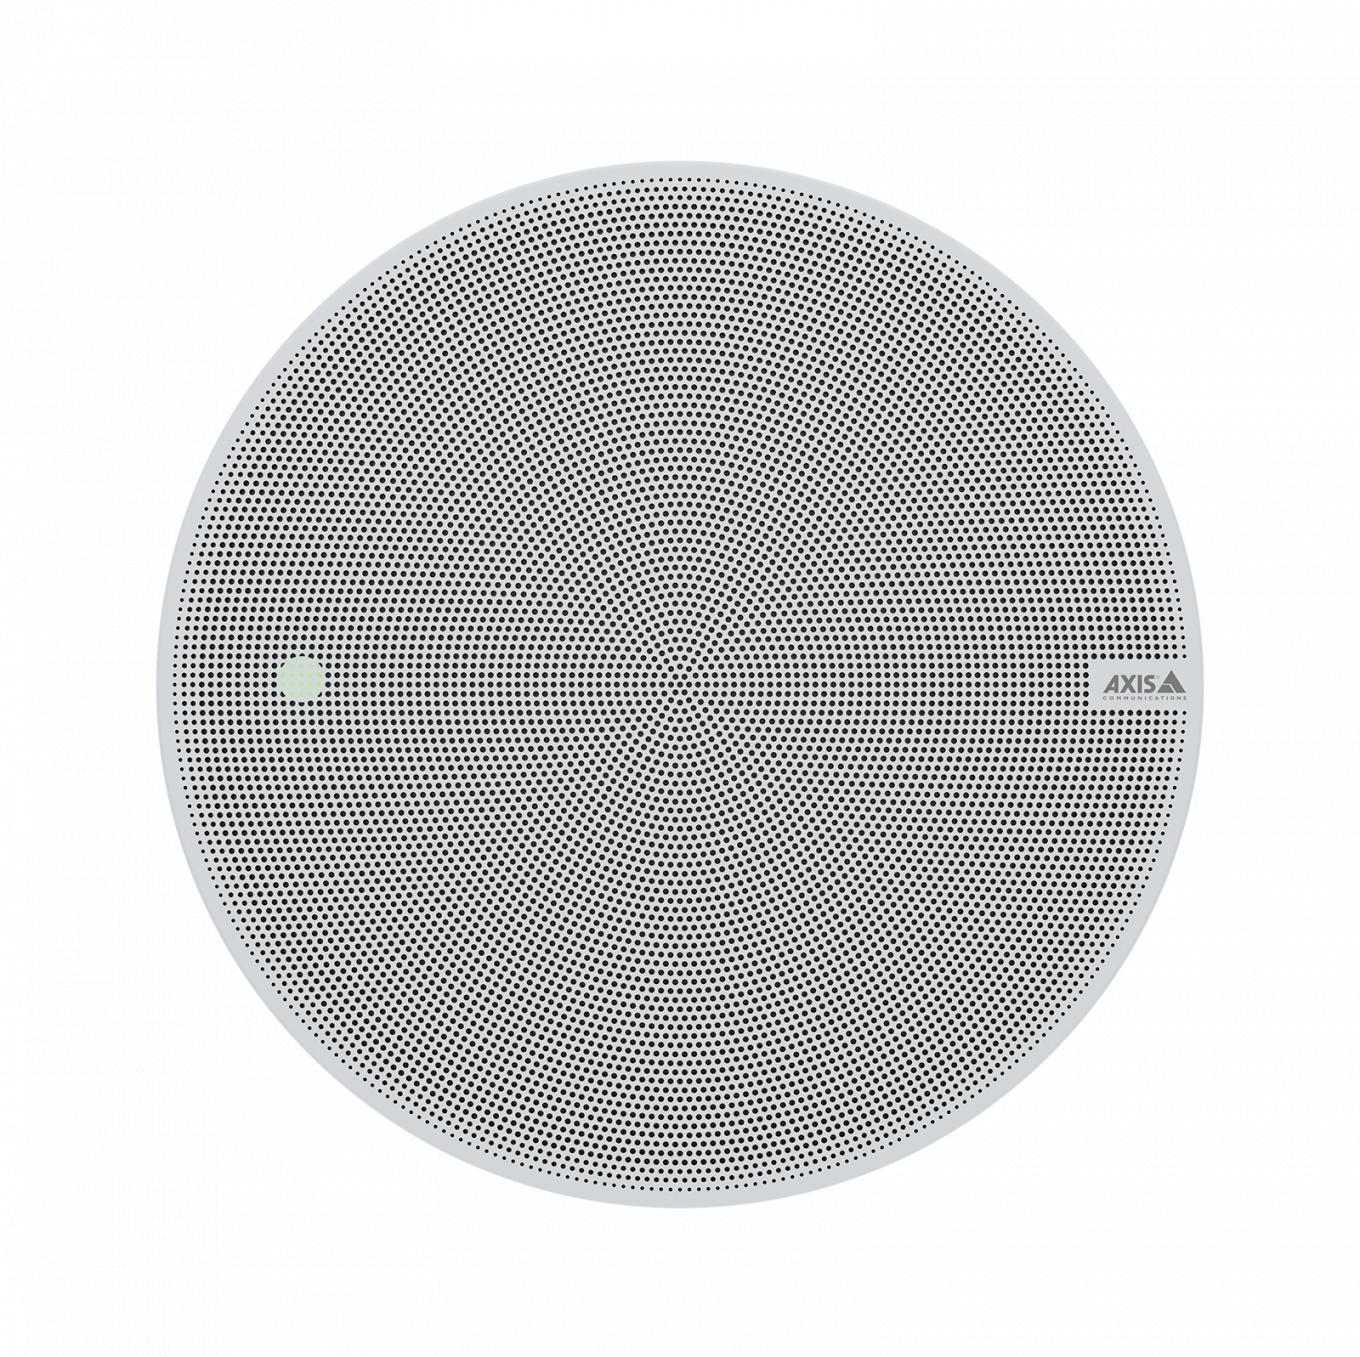 AXIS C1211-E Network Ceiling Speaker grey network speaker viewed from its front